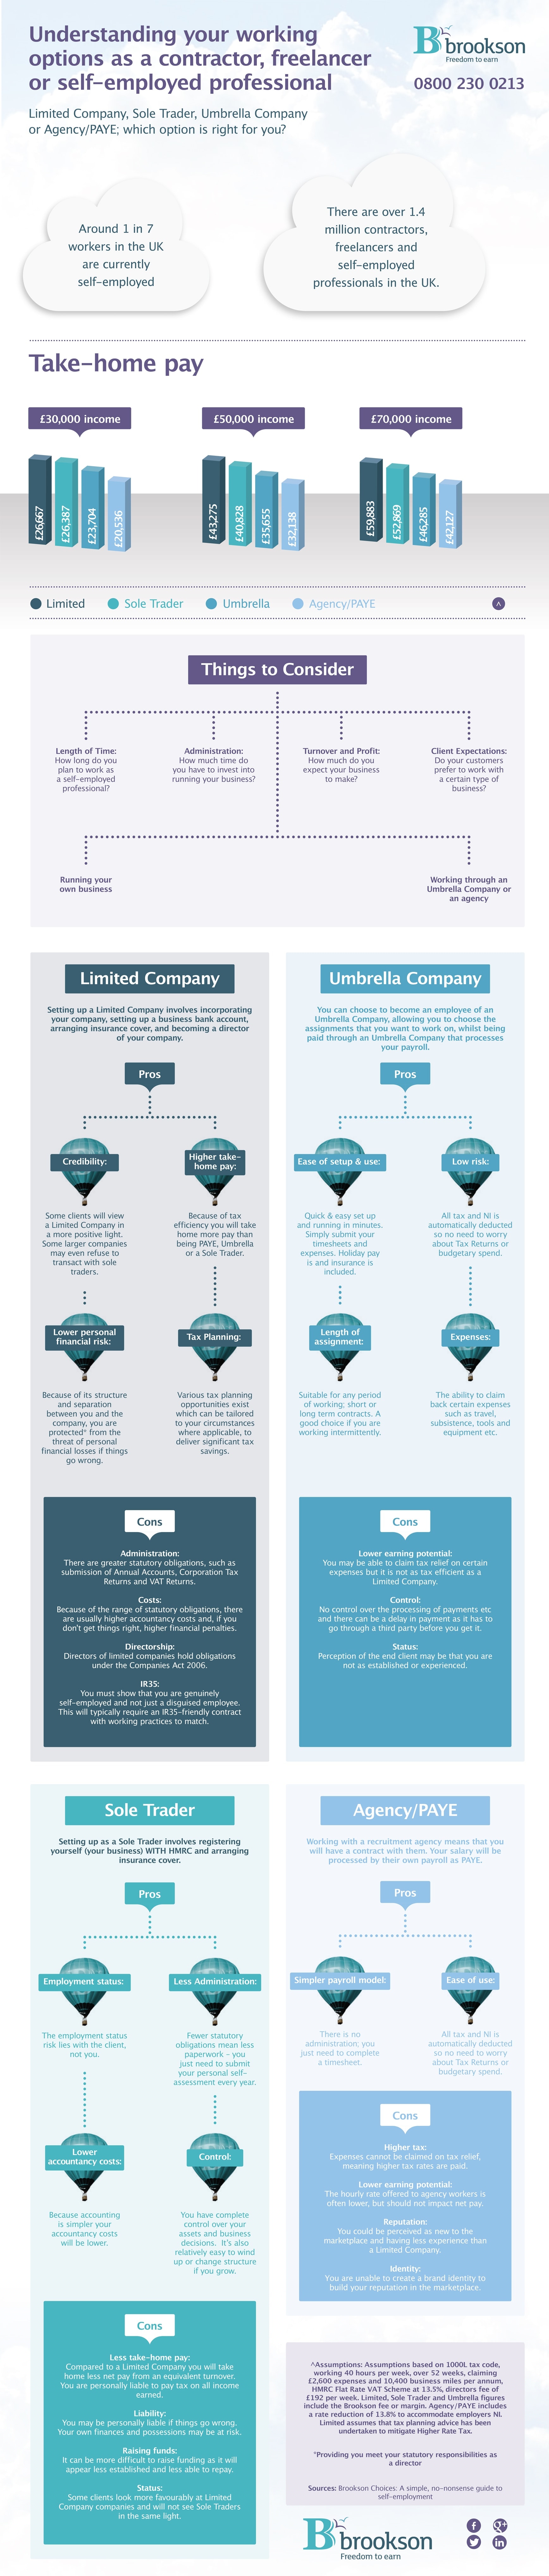 Understanding your working options - An infographic by the team at <a href=